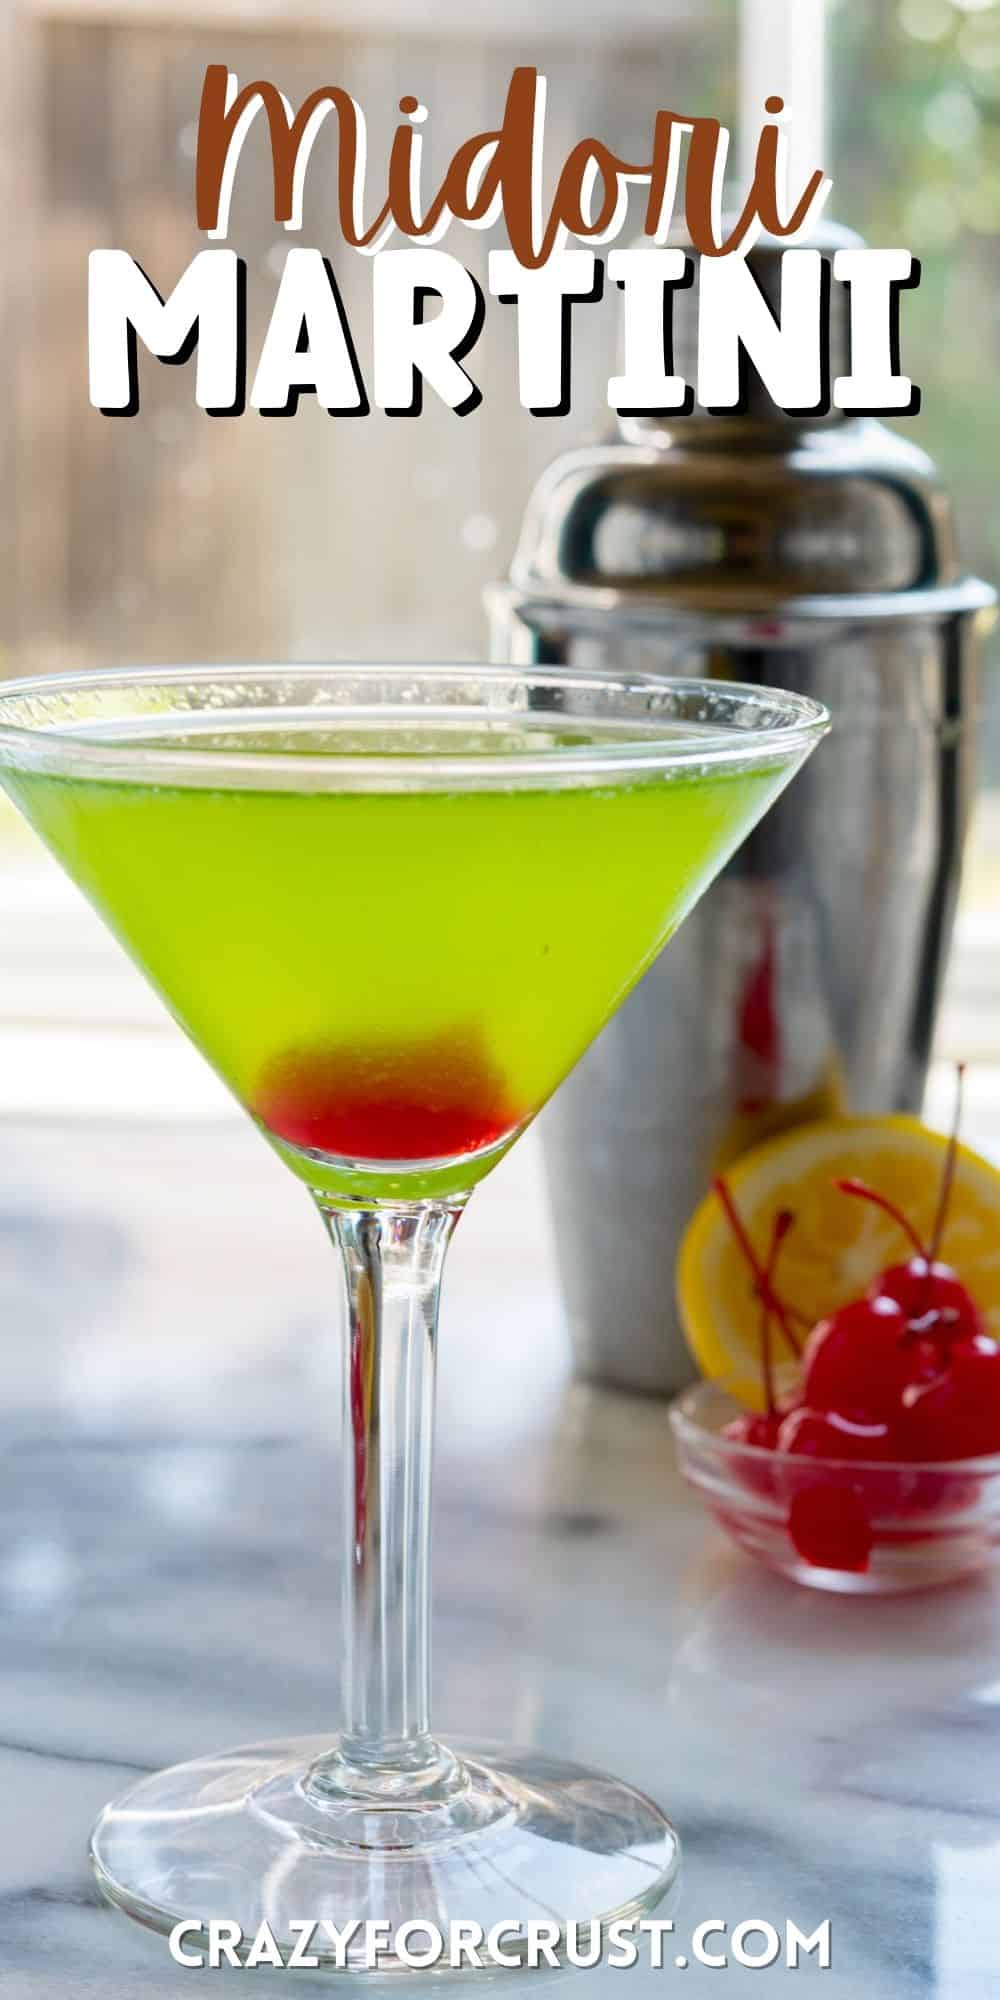 green martini with red at the bottom in a clear glass with words on top